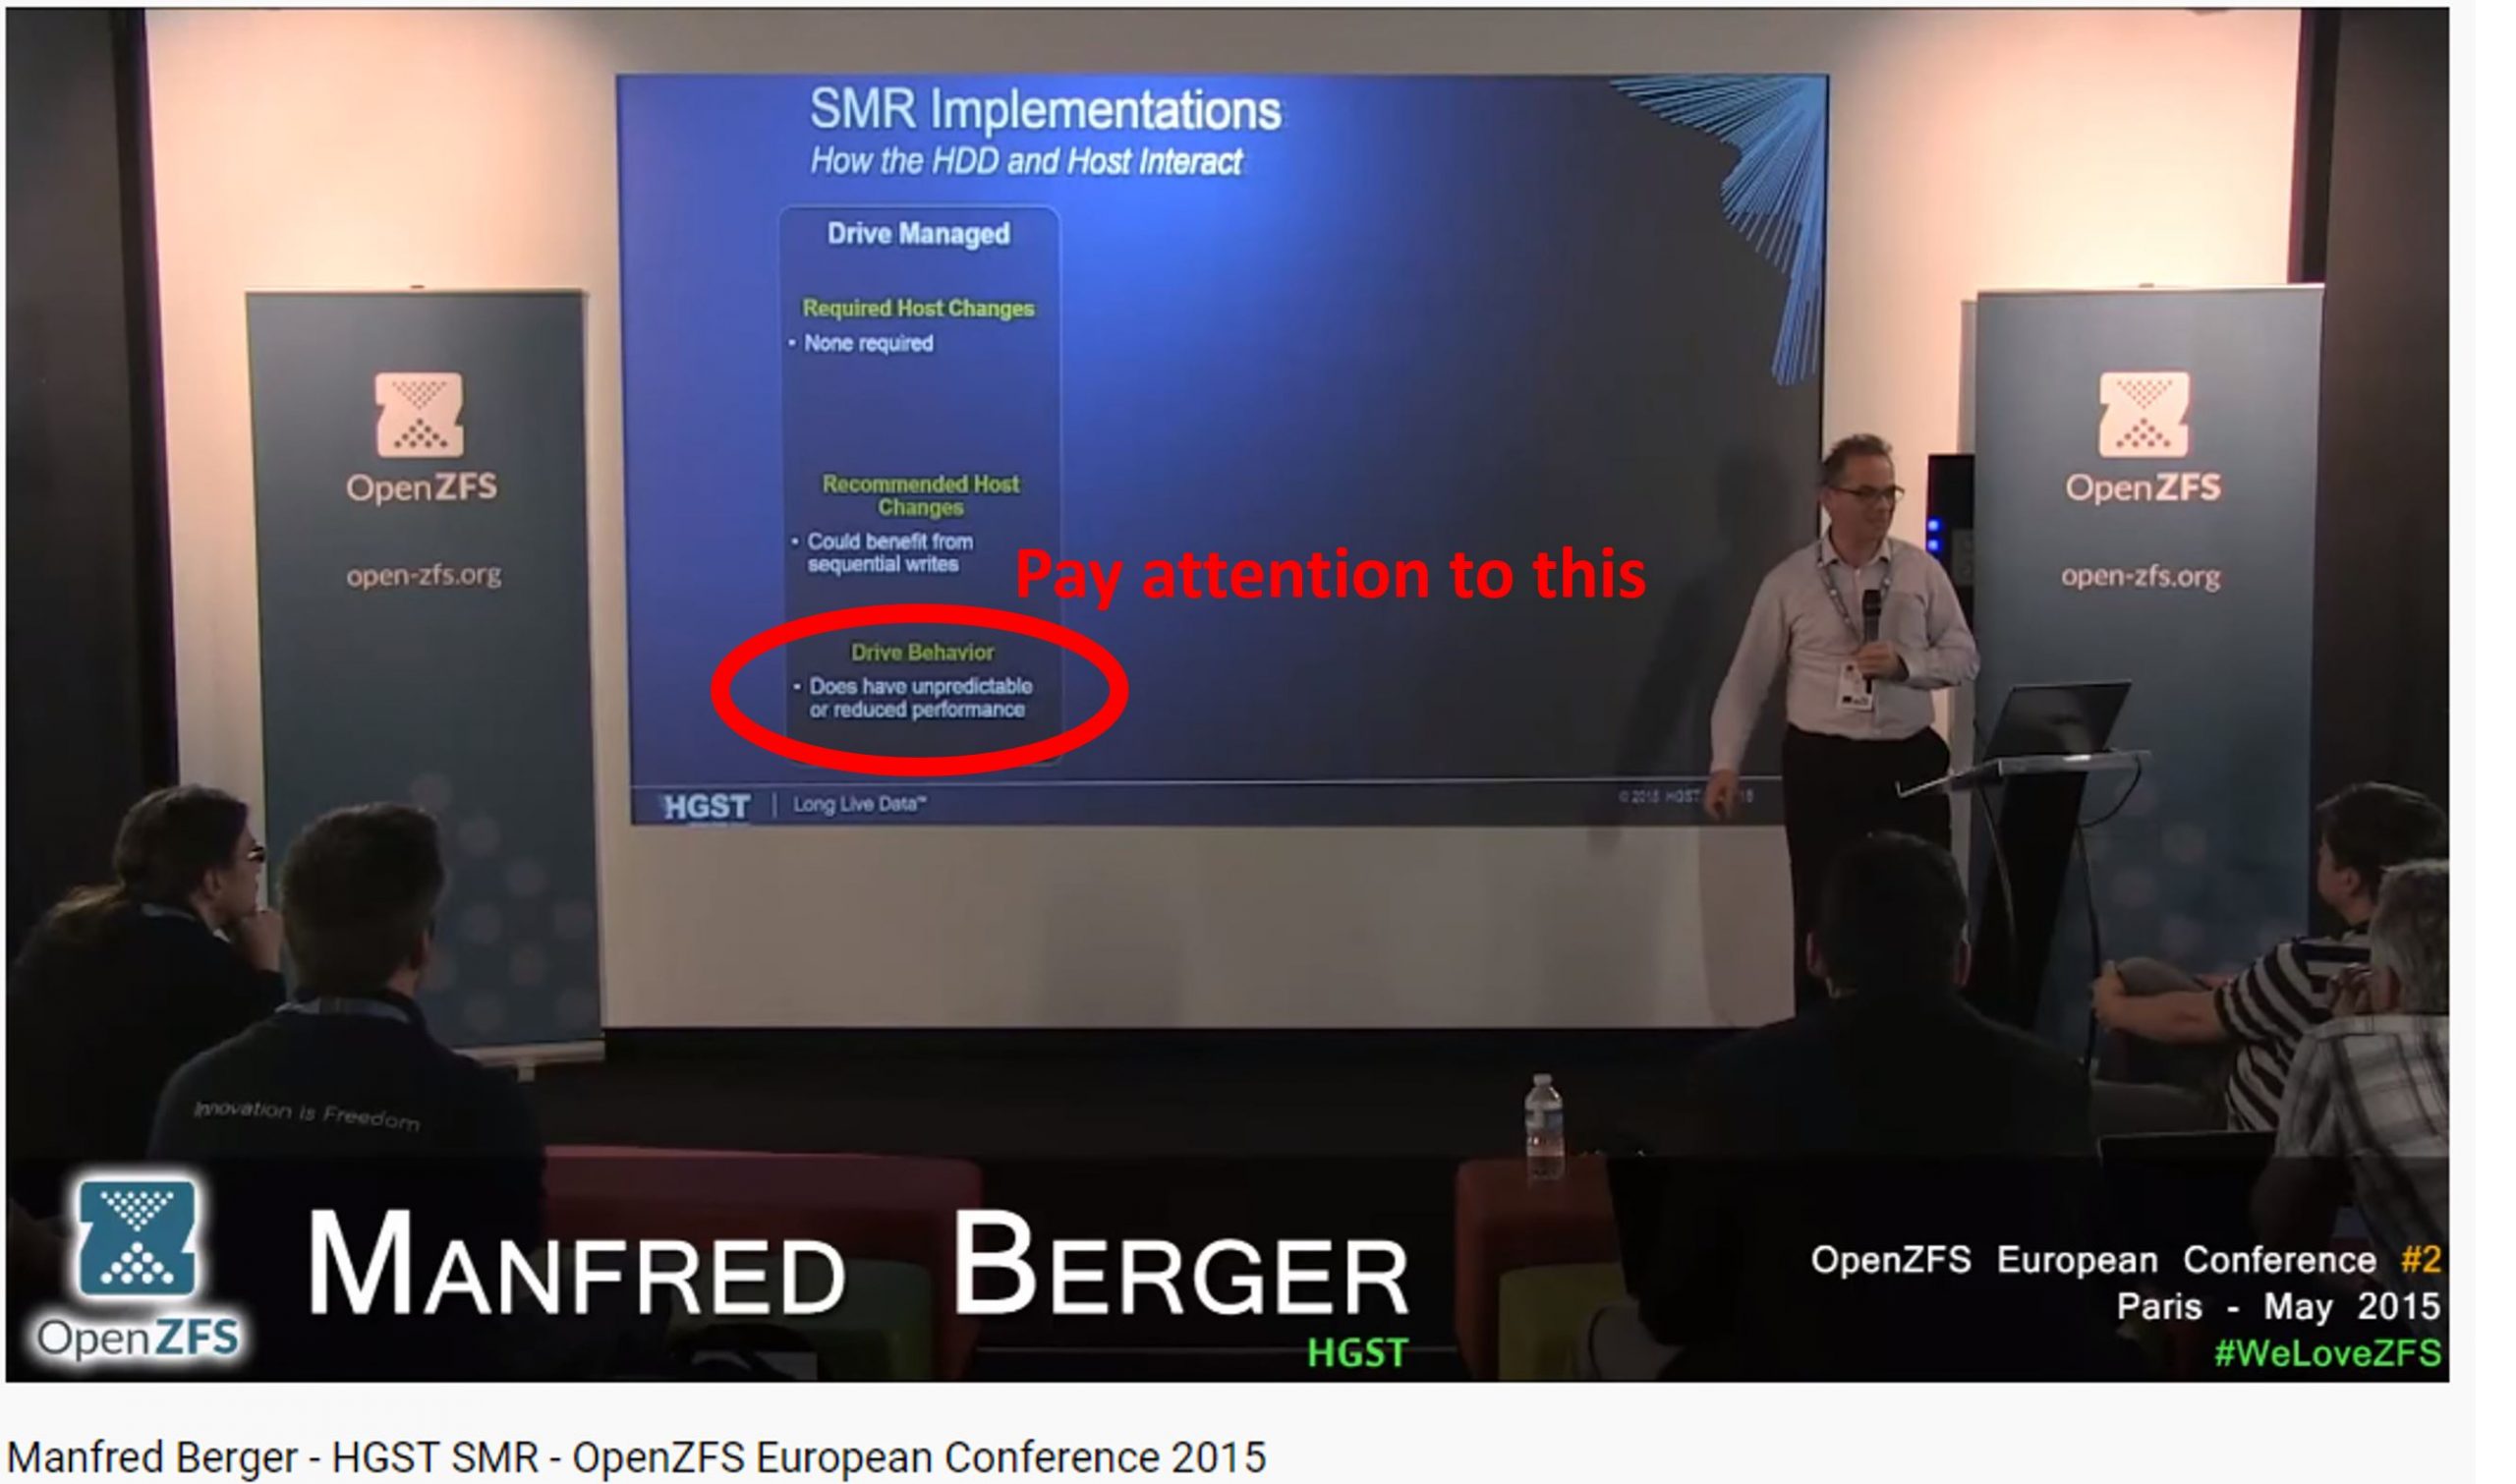 Manfred Berger HGST OpenZFS DM SMR Unpredictable Or Reduced Performance Highlighted